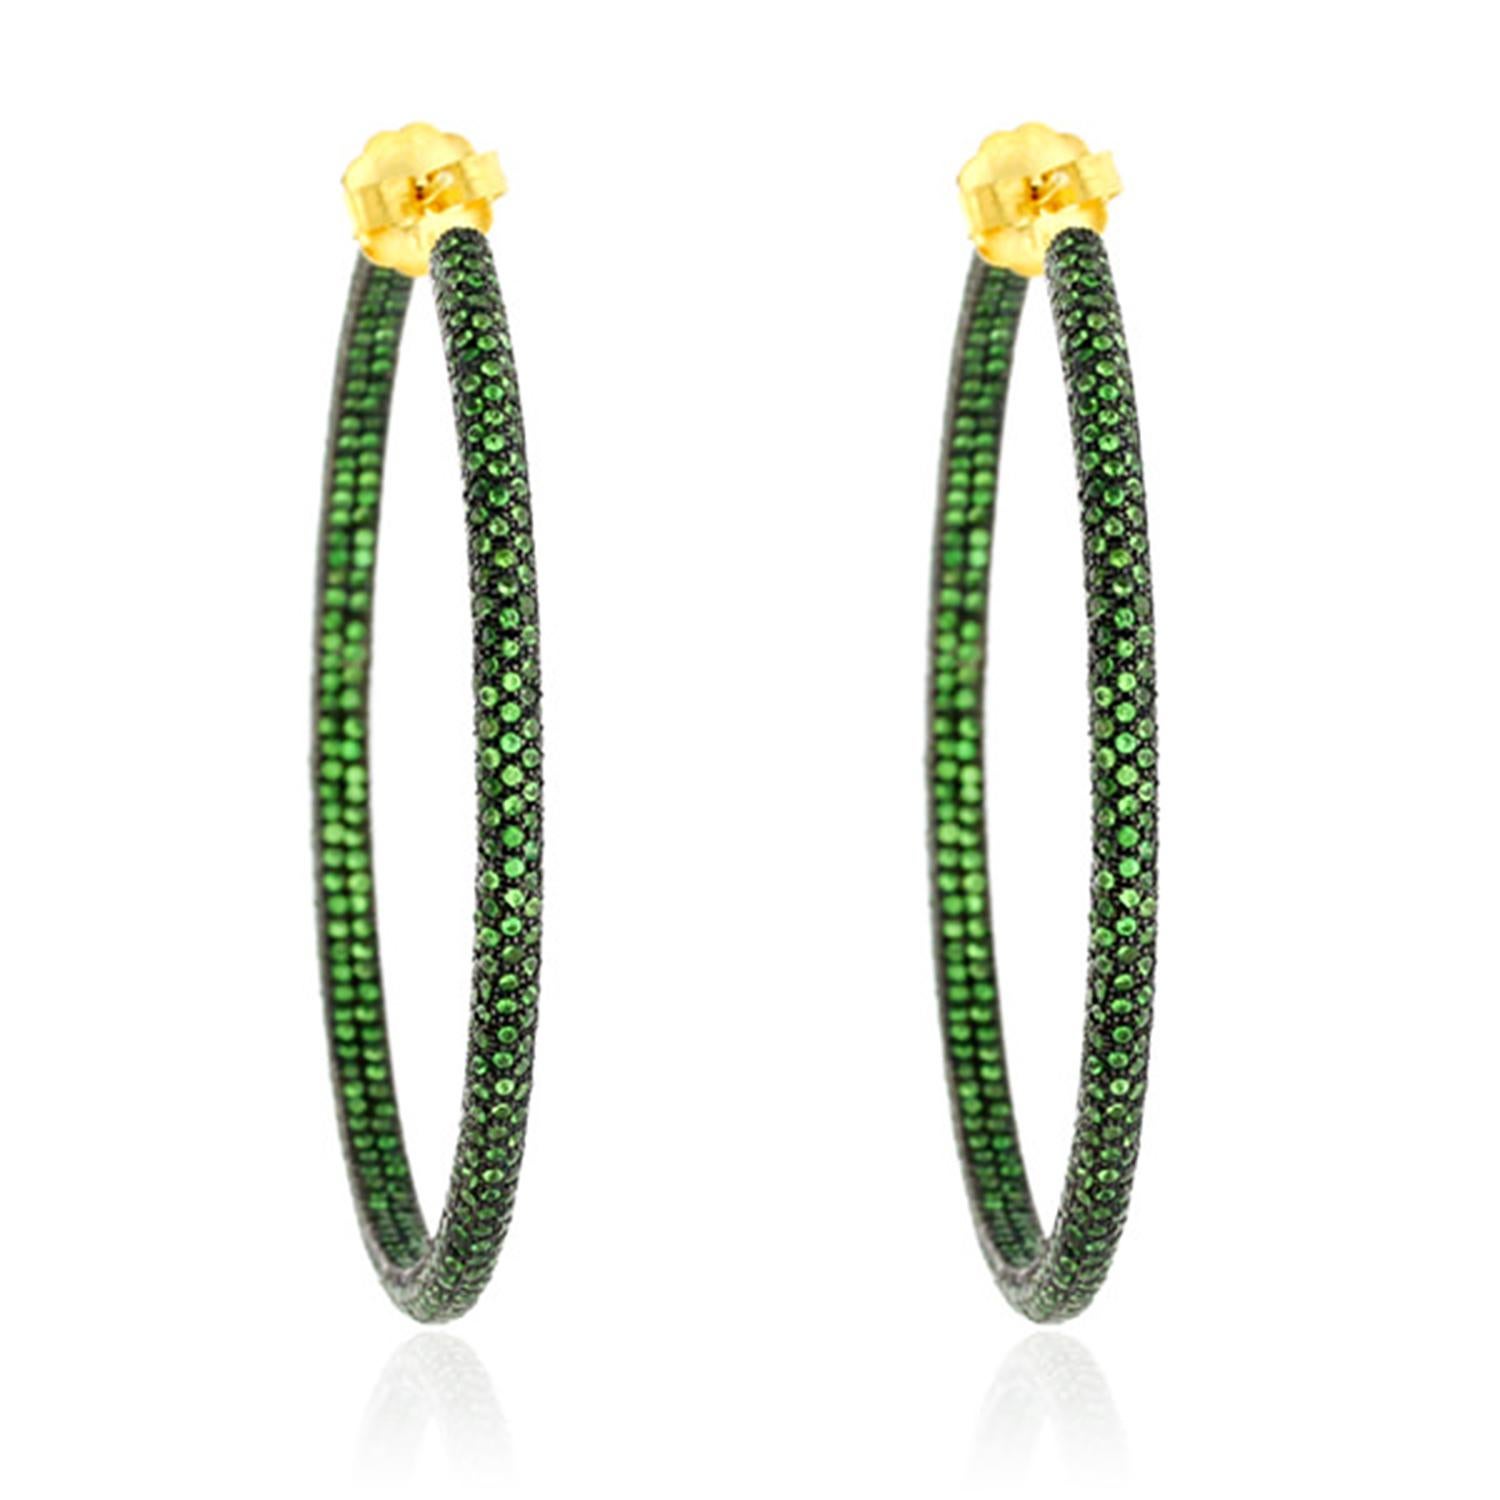 Handcrafted from 14-karat gold & sterling silver, these beautiful hoop earrings are set with 11.14 carats tsavorite. 

FOLLOW  MEGHNA JEWELS storefront to view the latest collection & exclusive pieces.  Meghna Jewels is proudly rated as a Top Seller